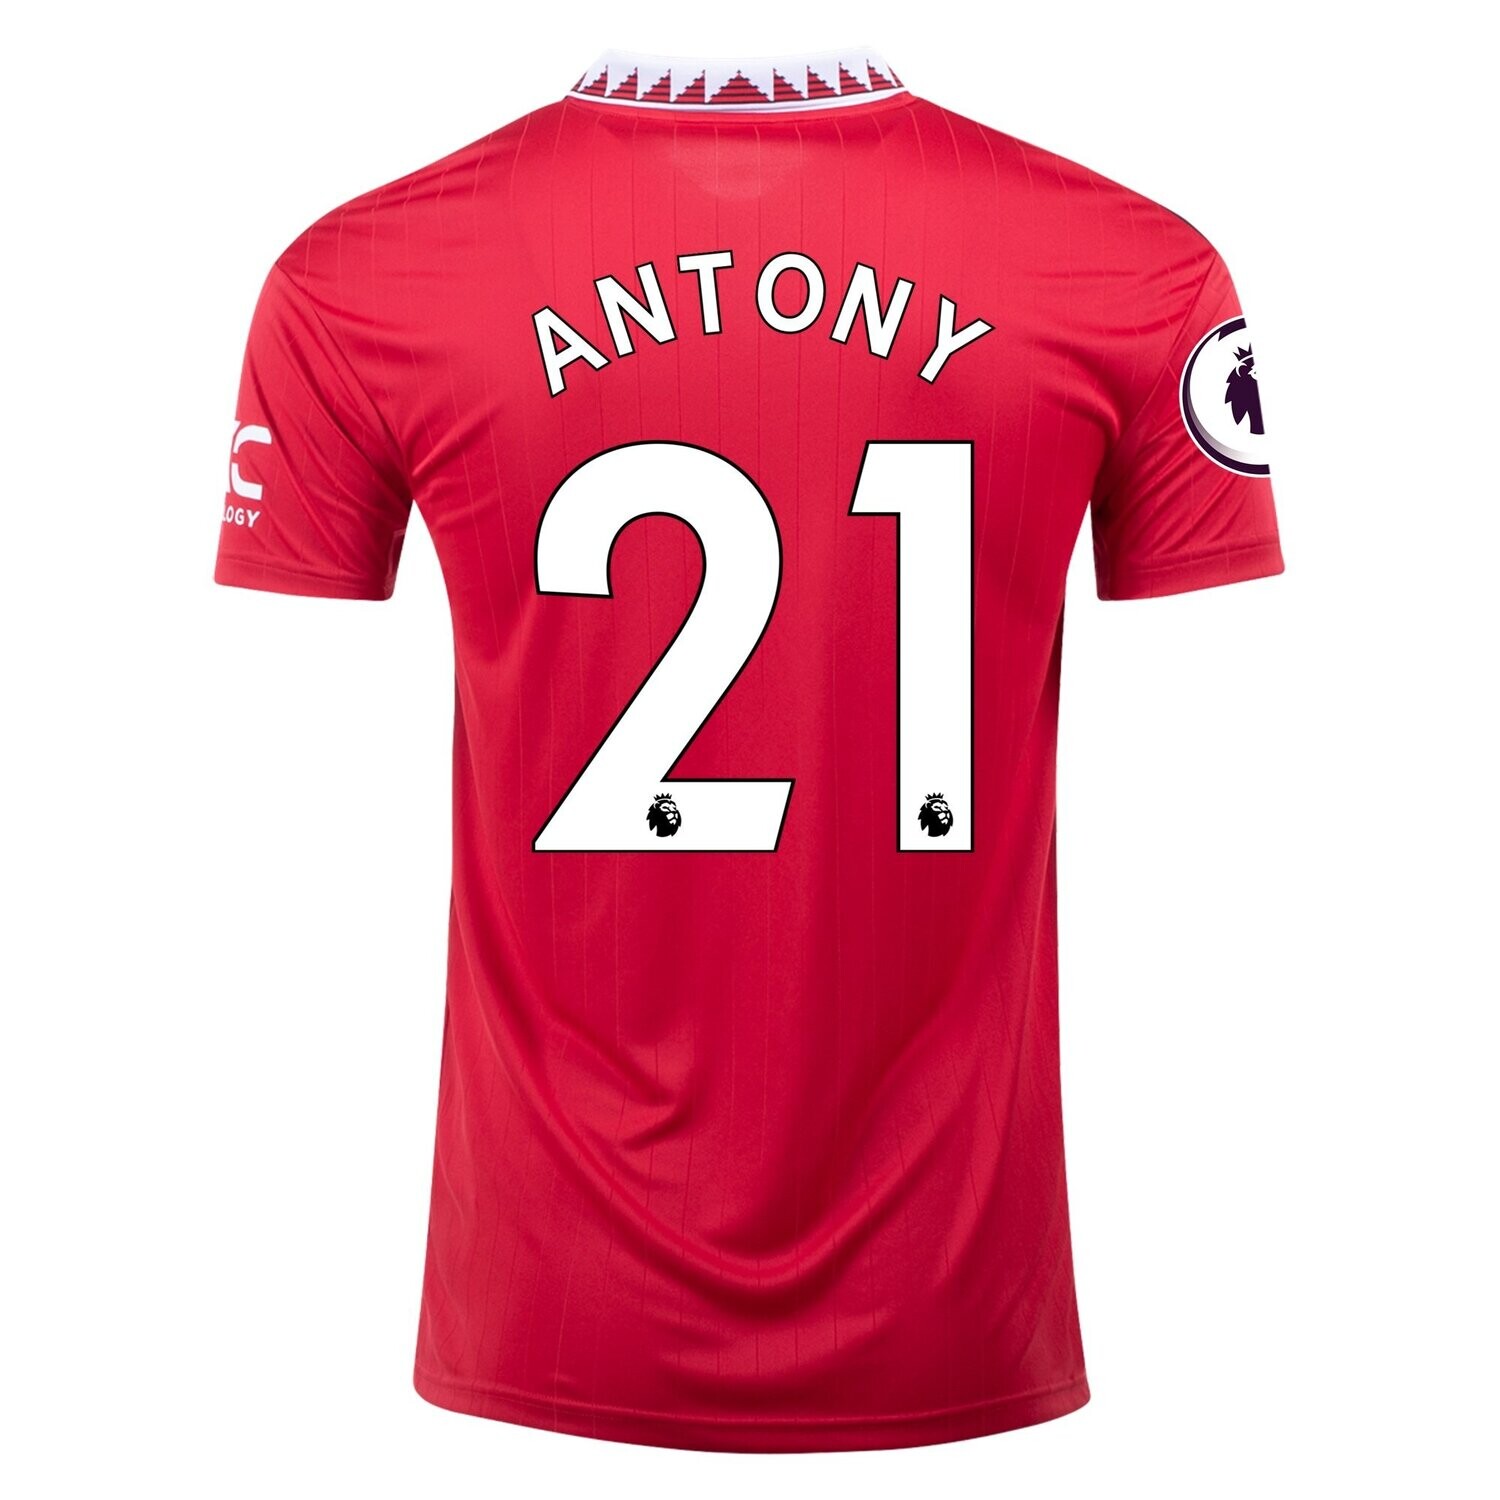 Antony #21 Manchester United Home Soccer Jersey 22-23